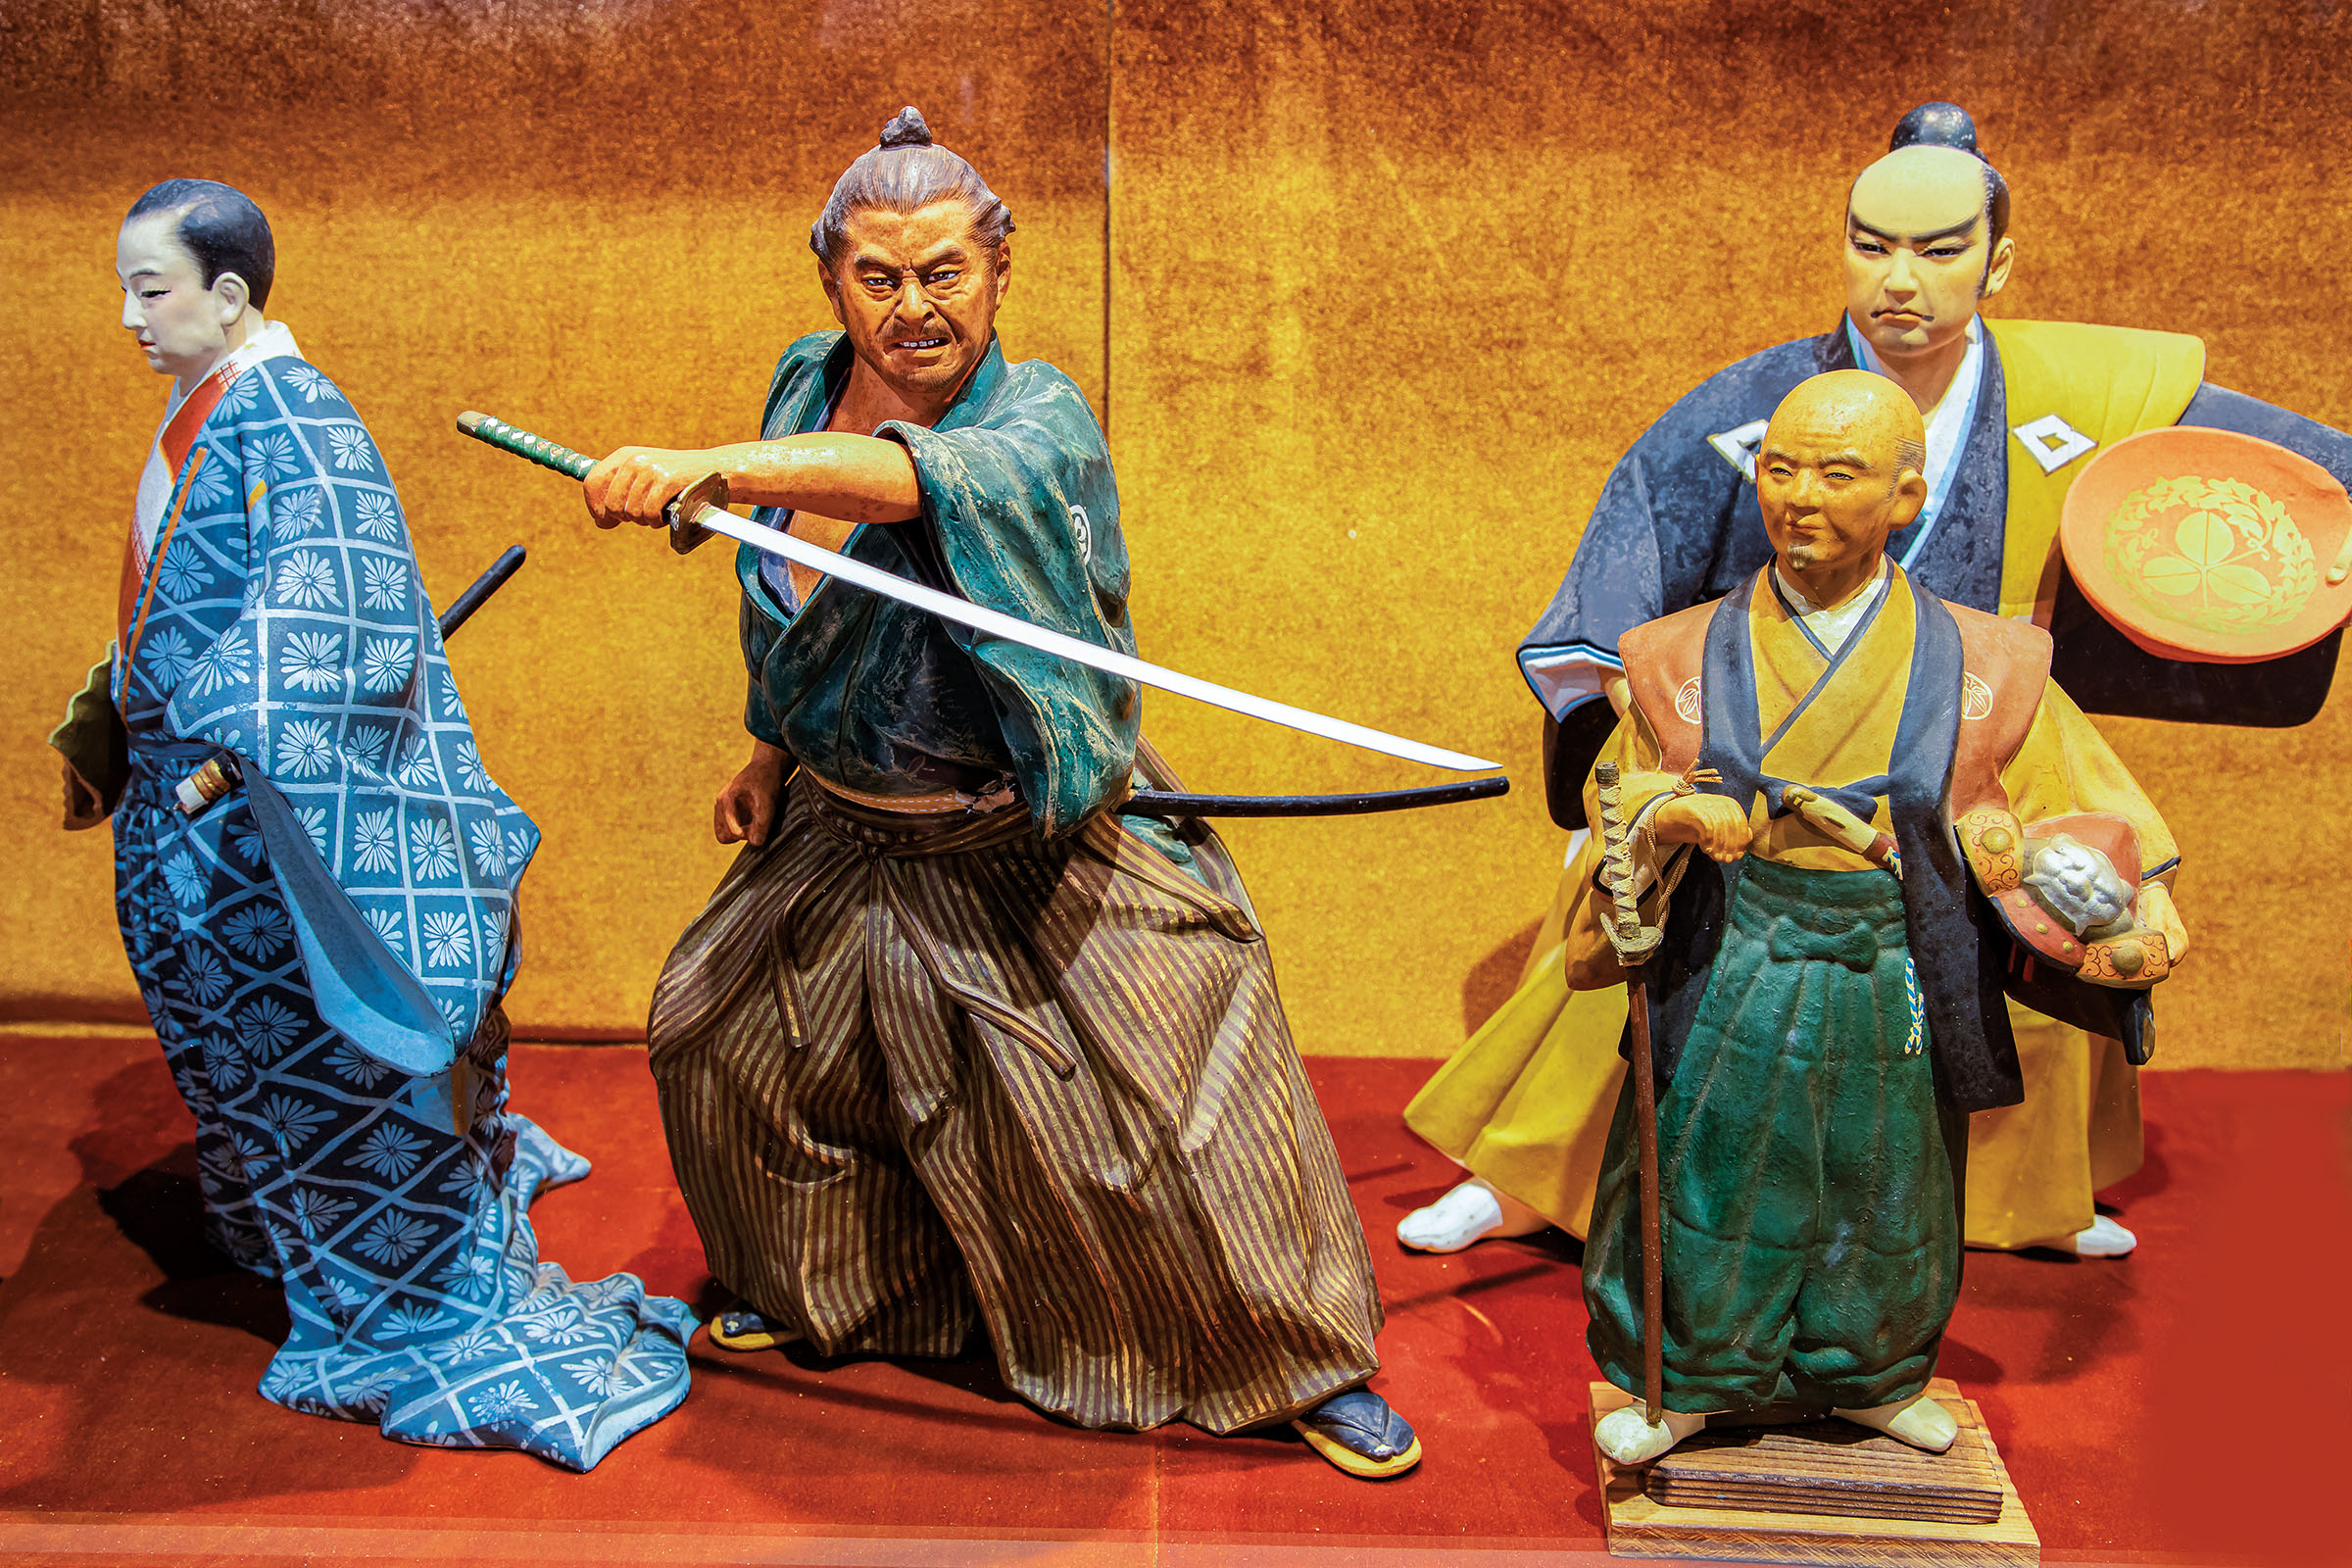 A group of brightly-colored figurines, one holding a wide sword